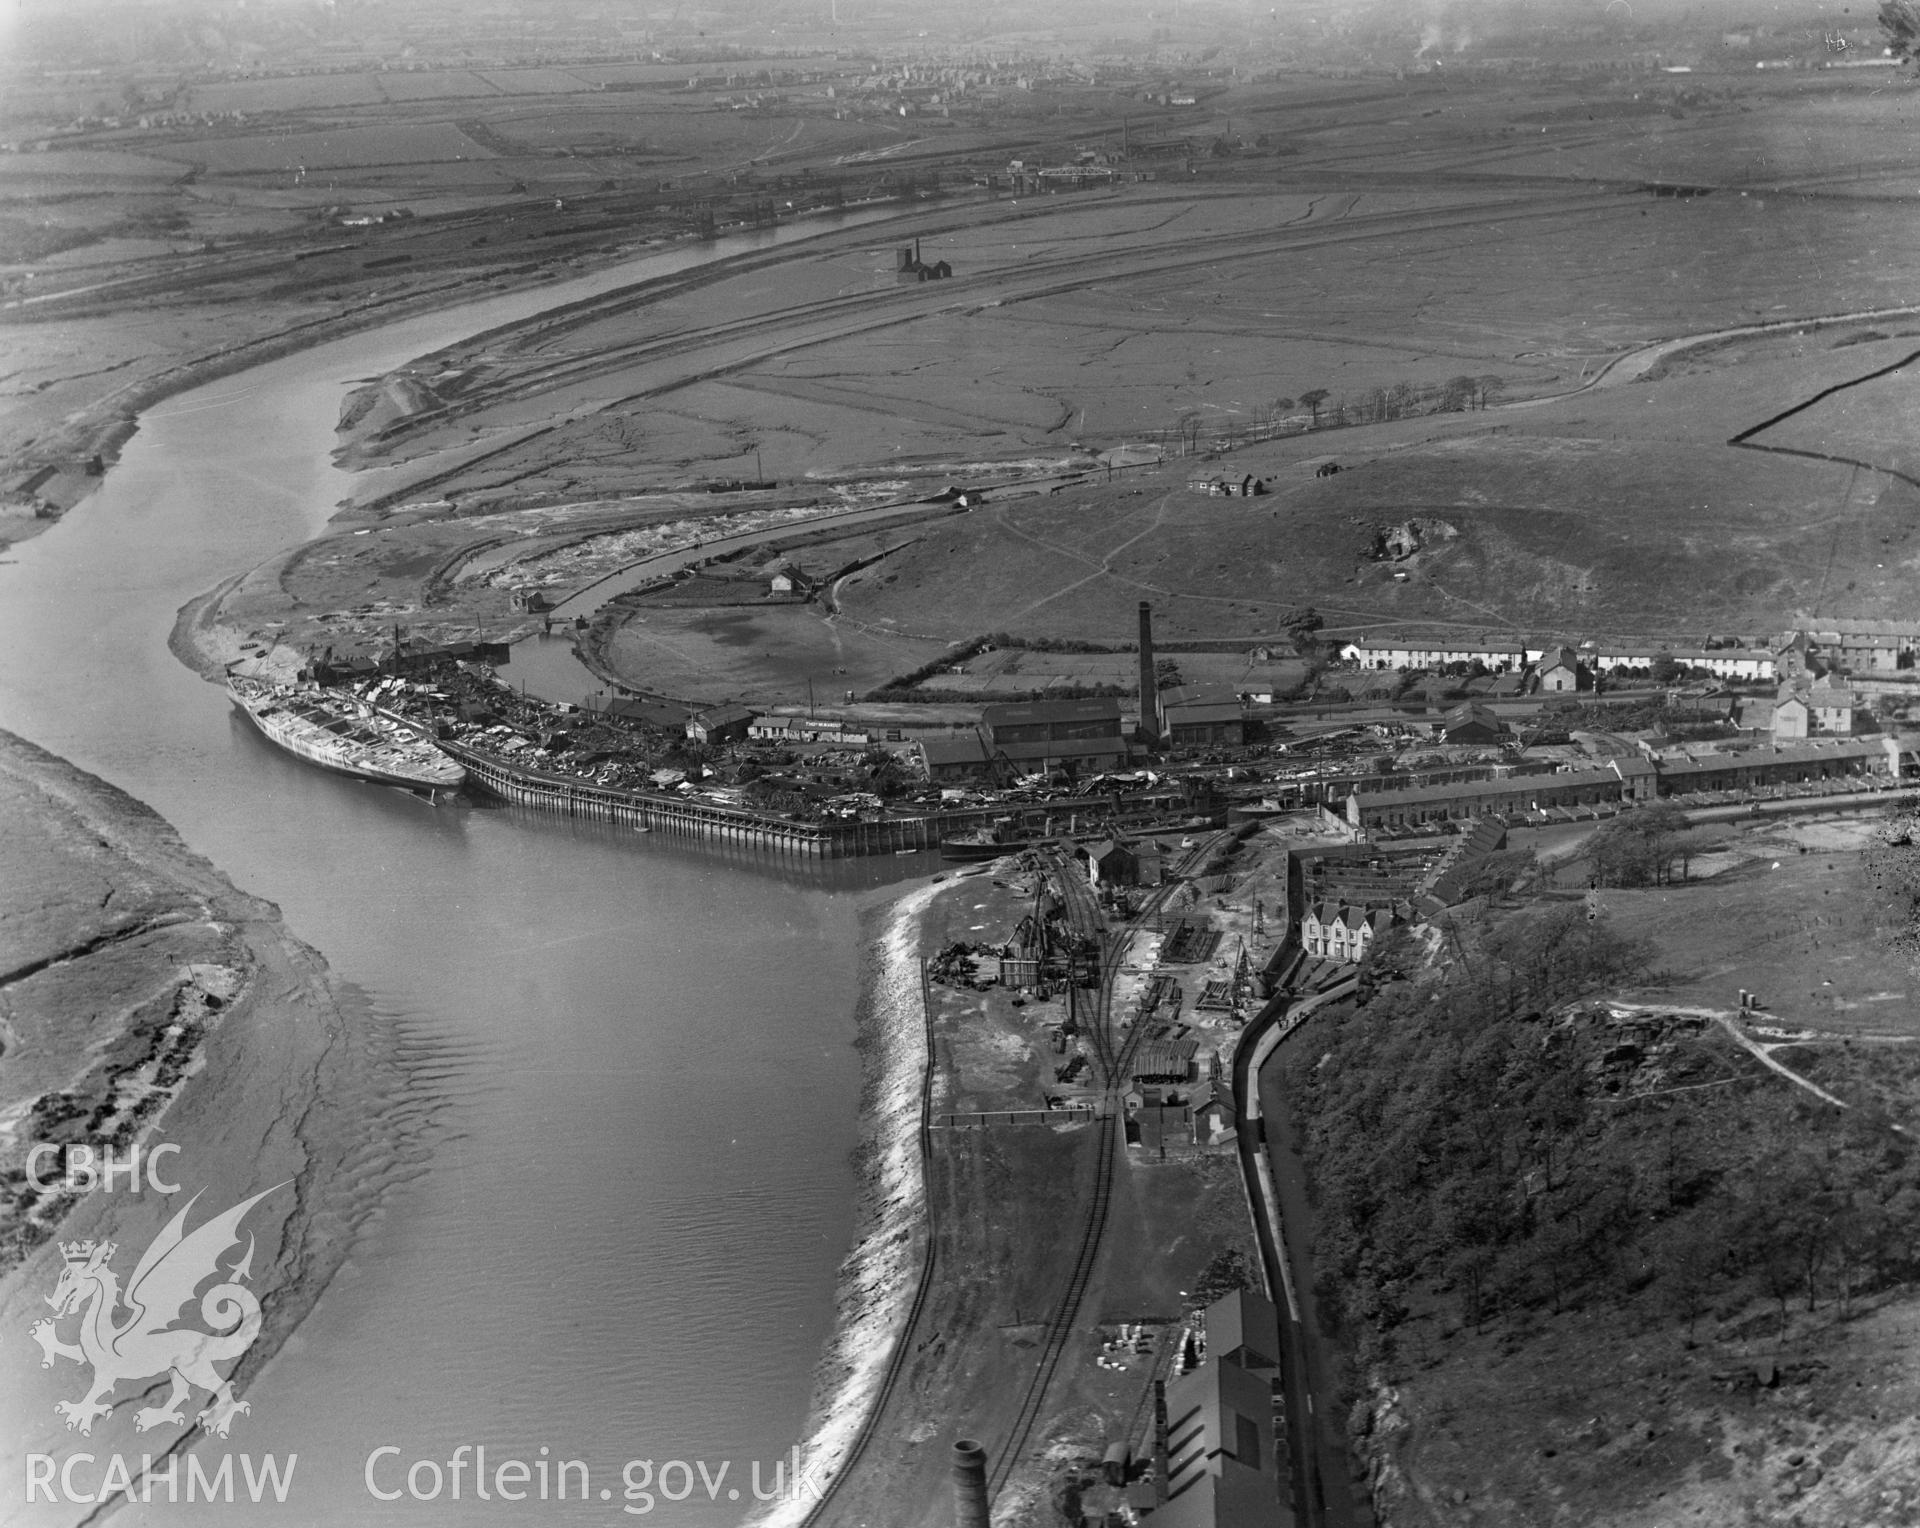 View of Briton Ferry dock showing naval vessel in process of being scrapped, oblique aerial view. 5?x4? black and white glass plate negative.